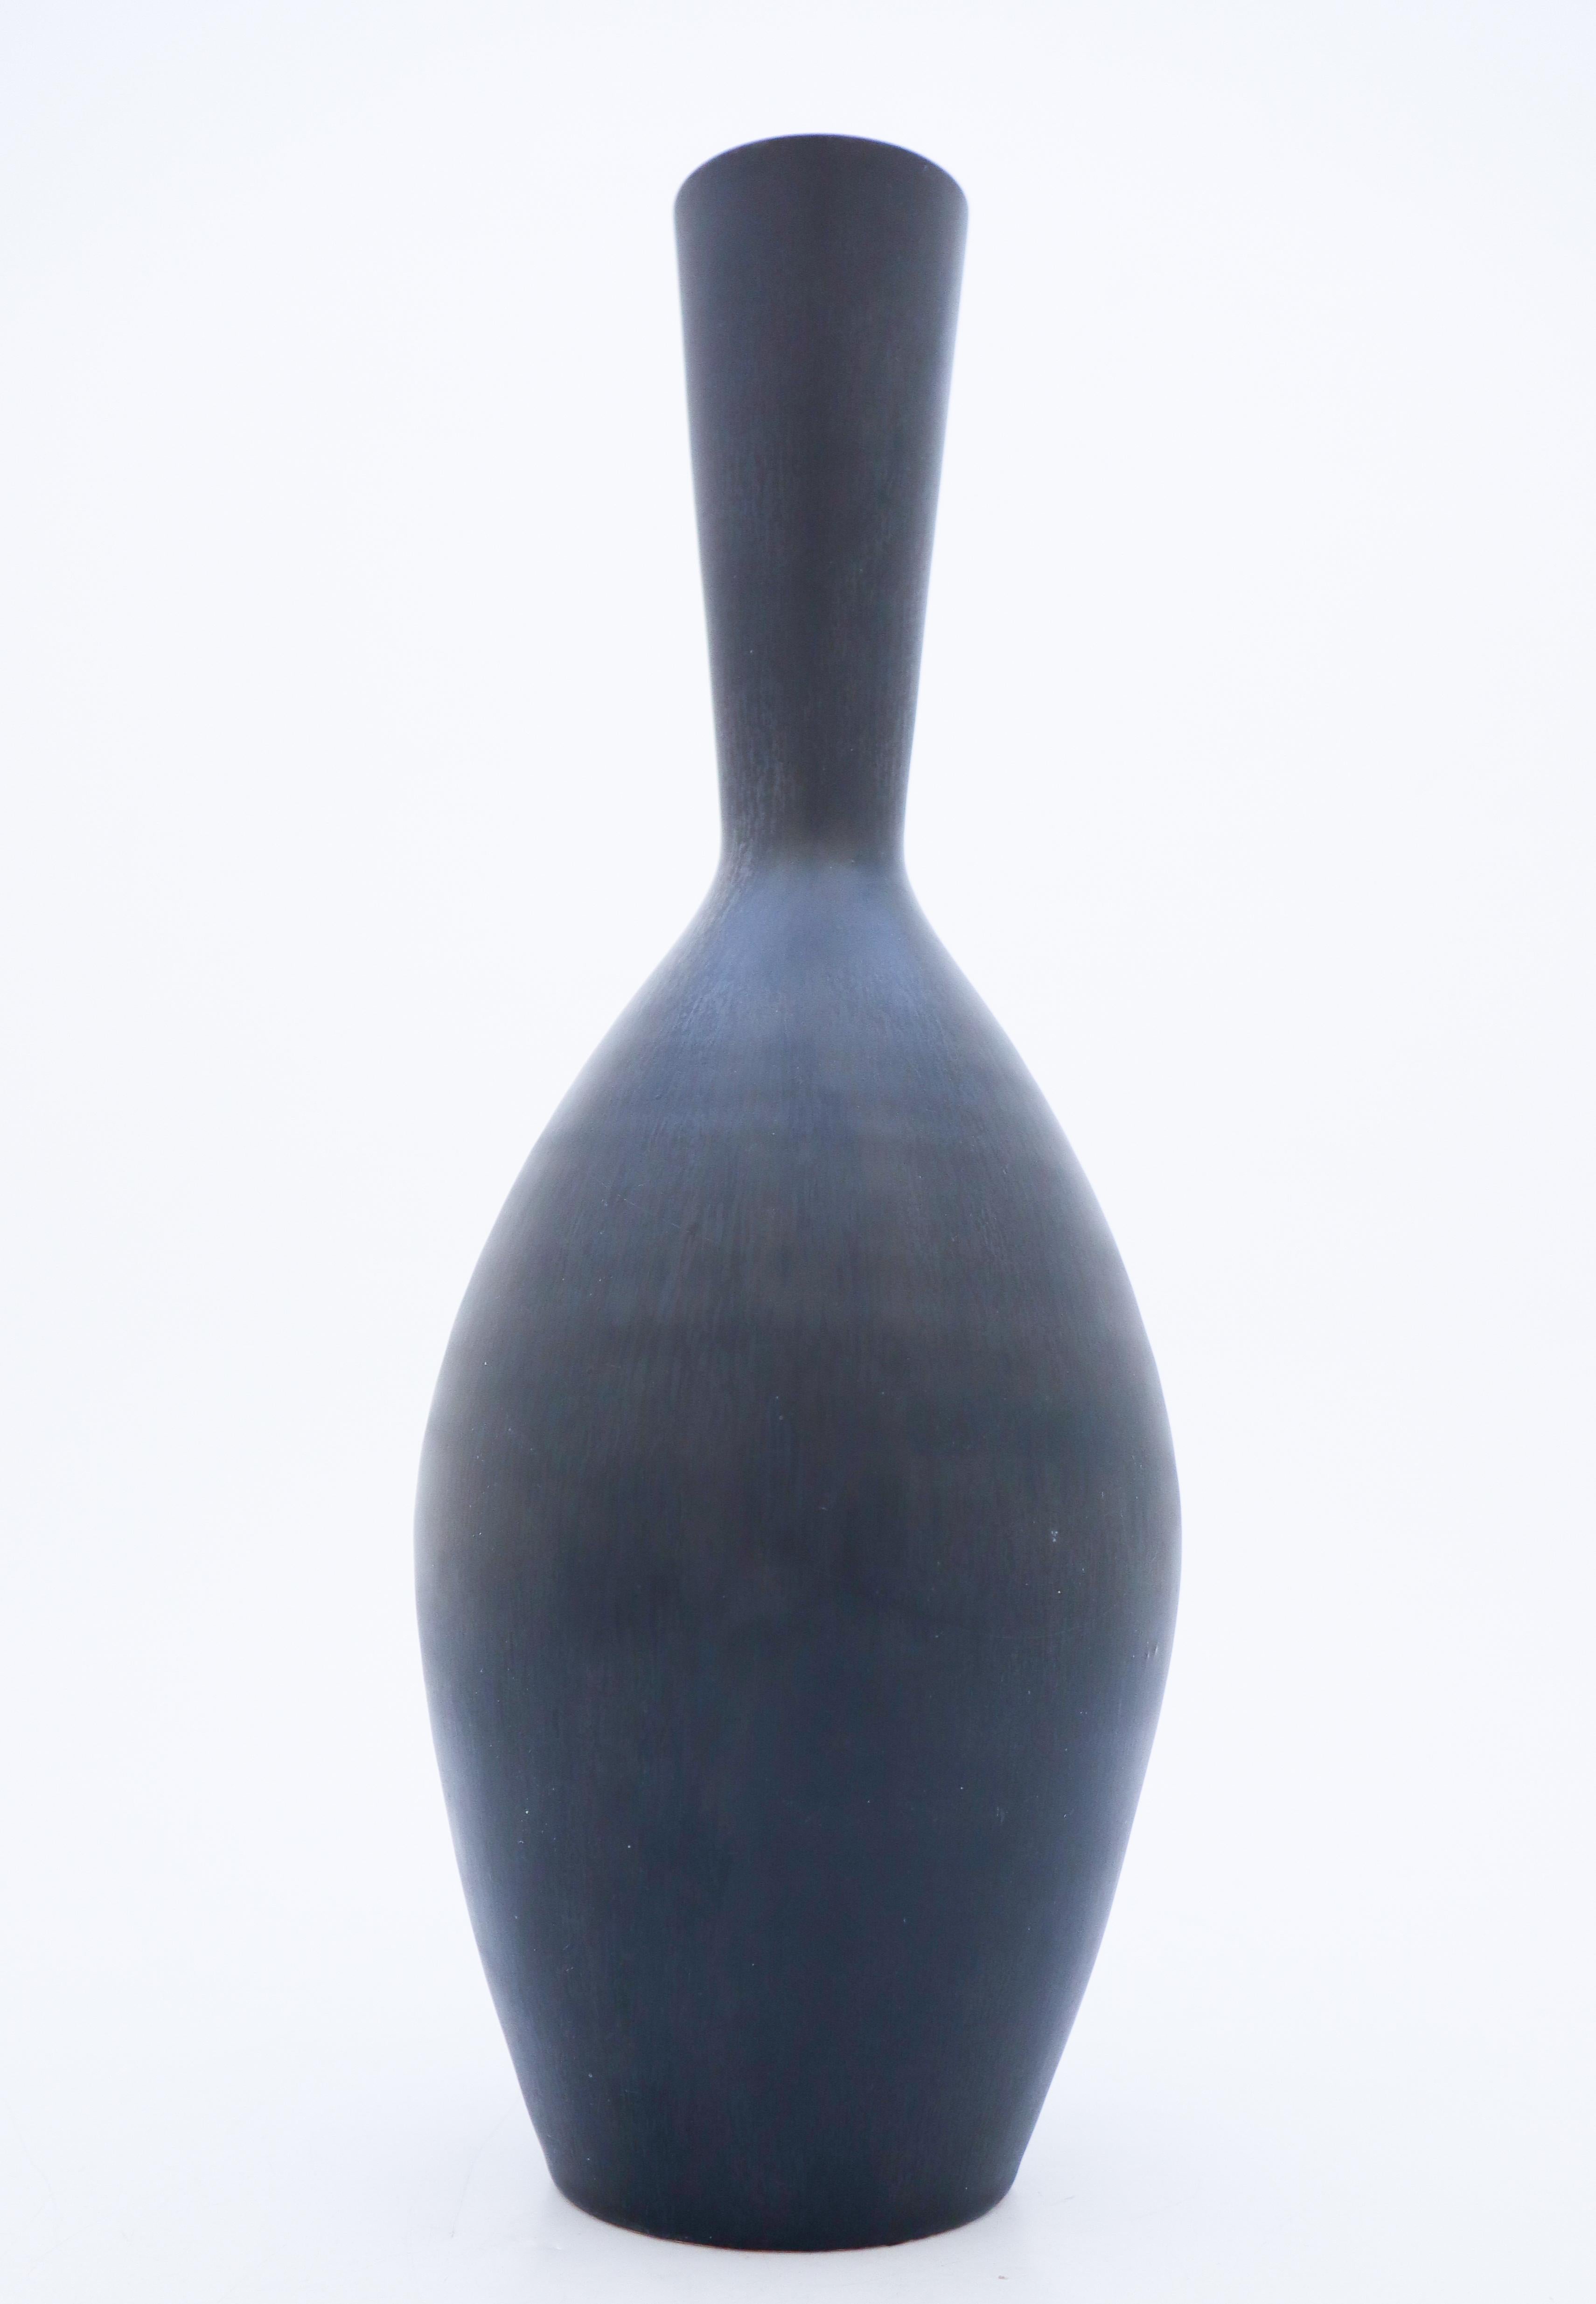 A beautiful midcentury Swedish vase in stoneware by Rörstrand, designed by Carl-Harry Stålhane. The vase is marked as 2nd quality because of some blurriness in the glaze around the neck.